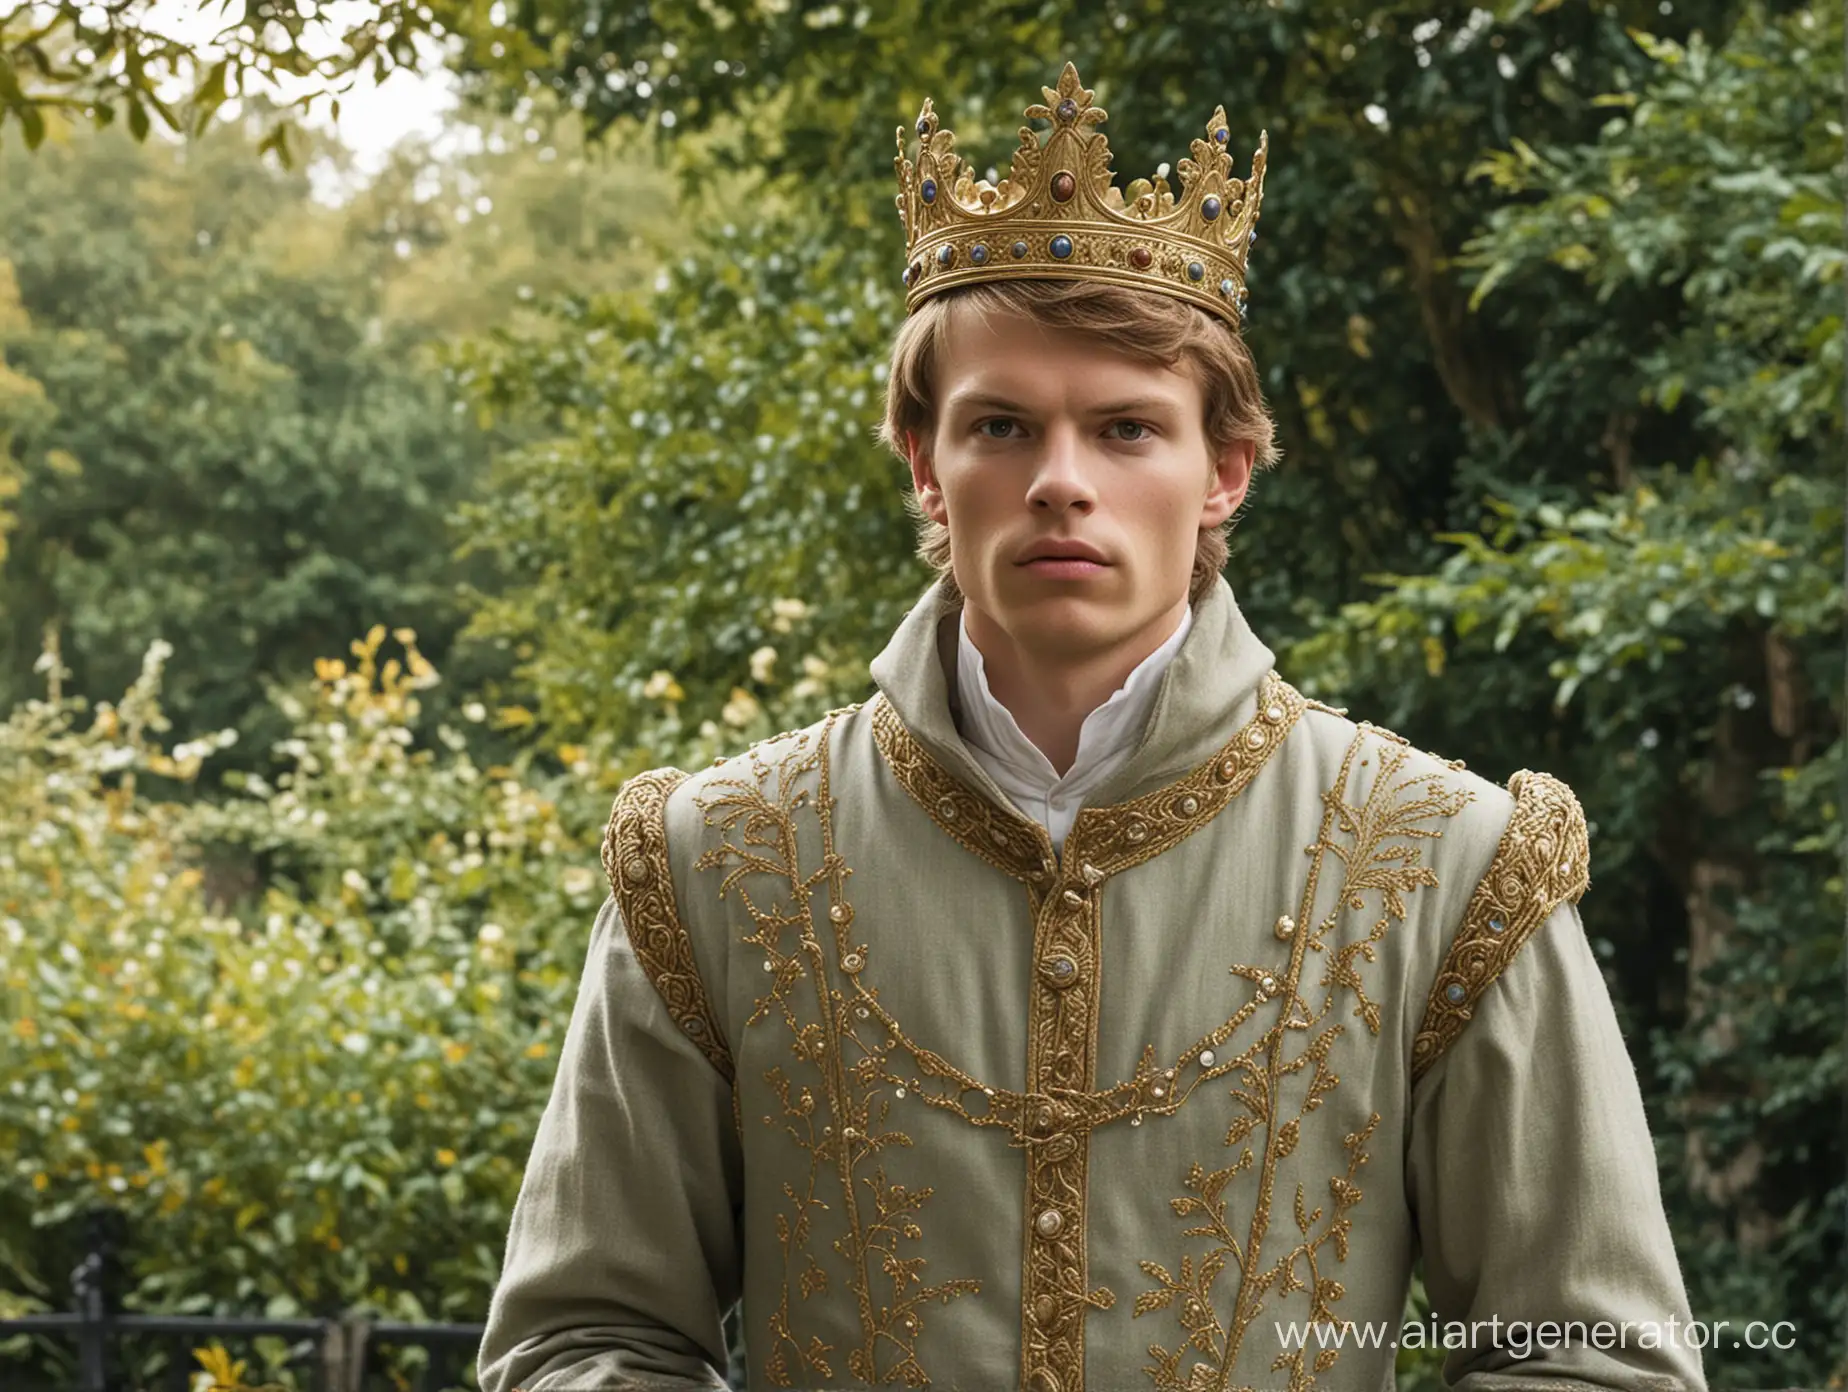 As a king, Edmund was expected to be a beacon of wisdom and strength, a symbol of unity and hope for his people. Yet, deep down, he felt like an imposter, plagued by self-doubt and insecurity. He longed for the simpler days of his youth, when he could roam the palace gardens without the weight of a crown upon his head.